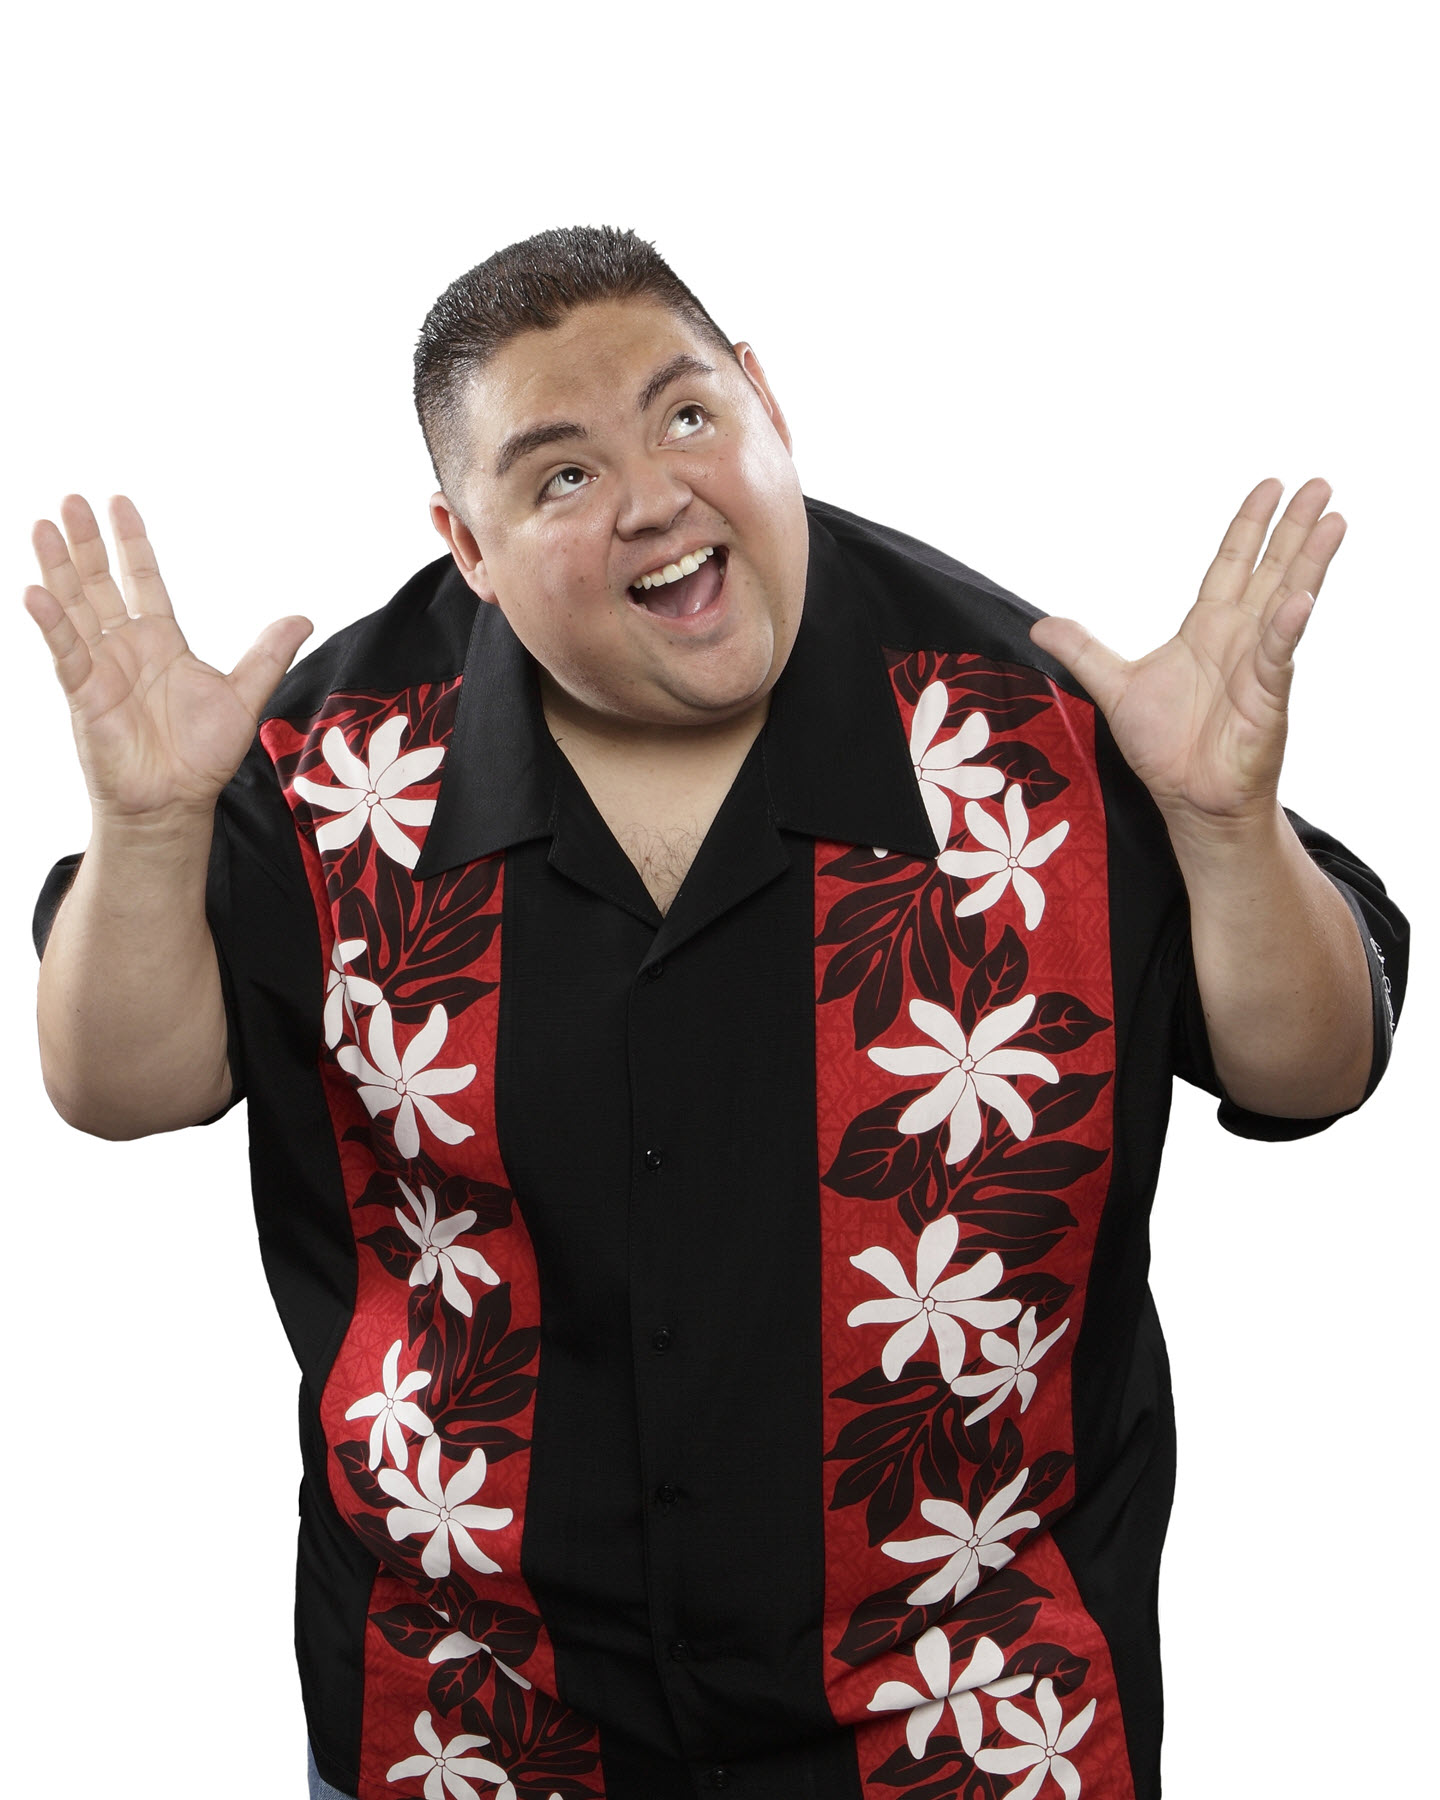 Comedian Gabriel Iglesias Fluffy laughing in black and red shirt